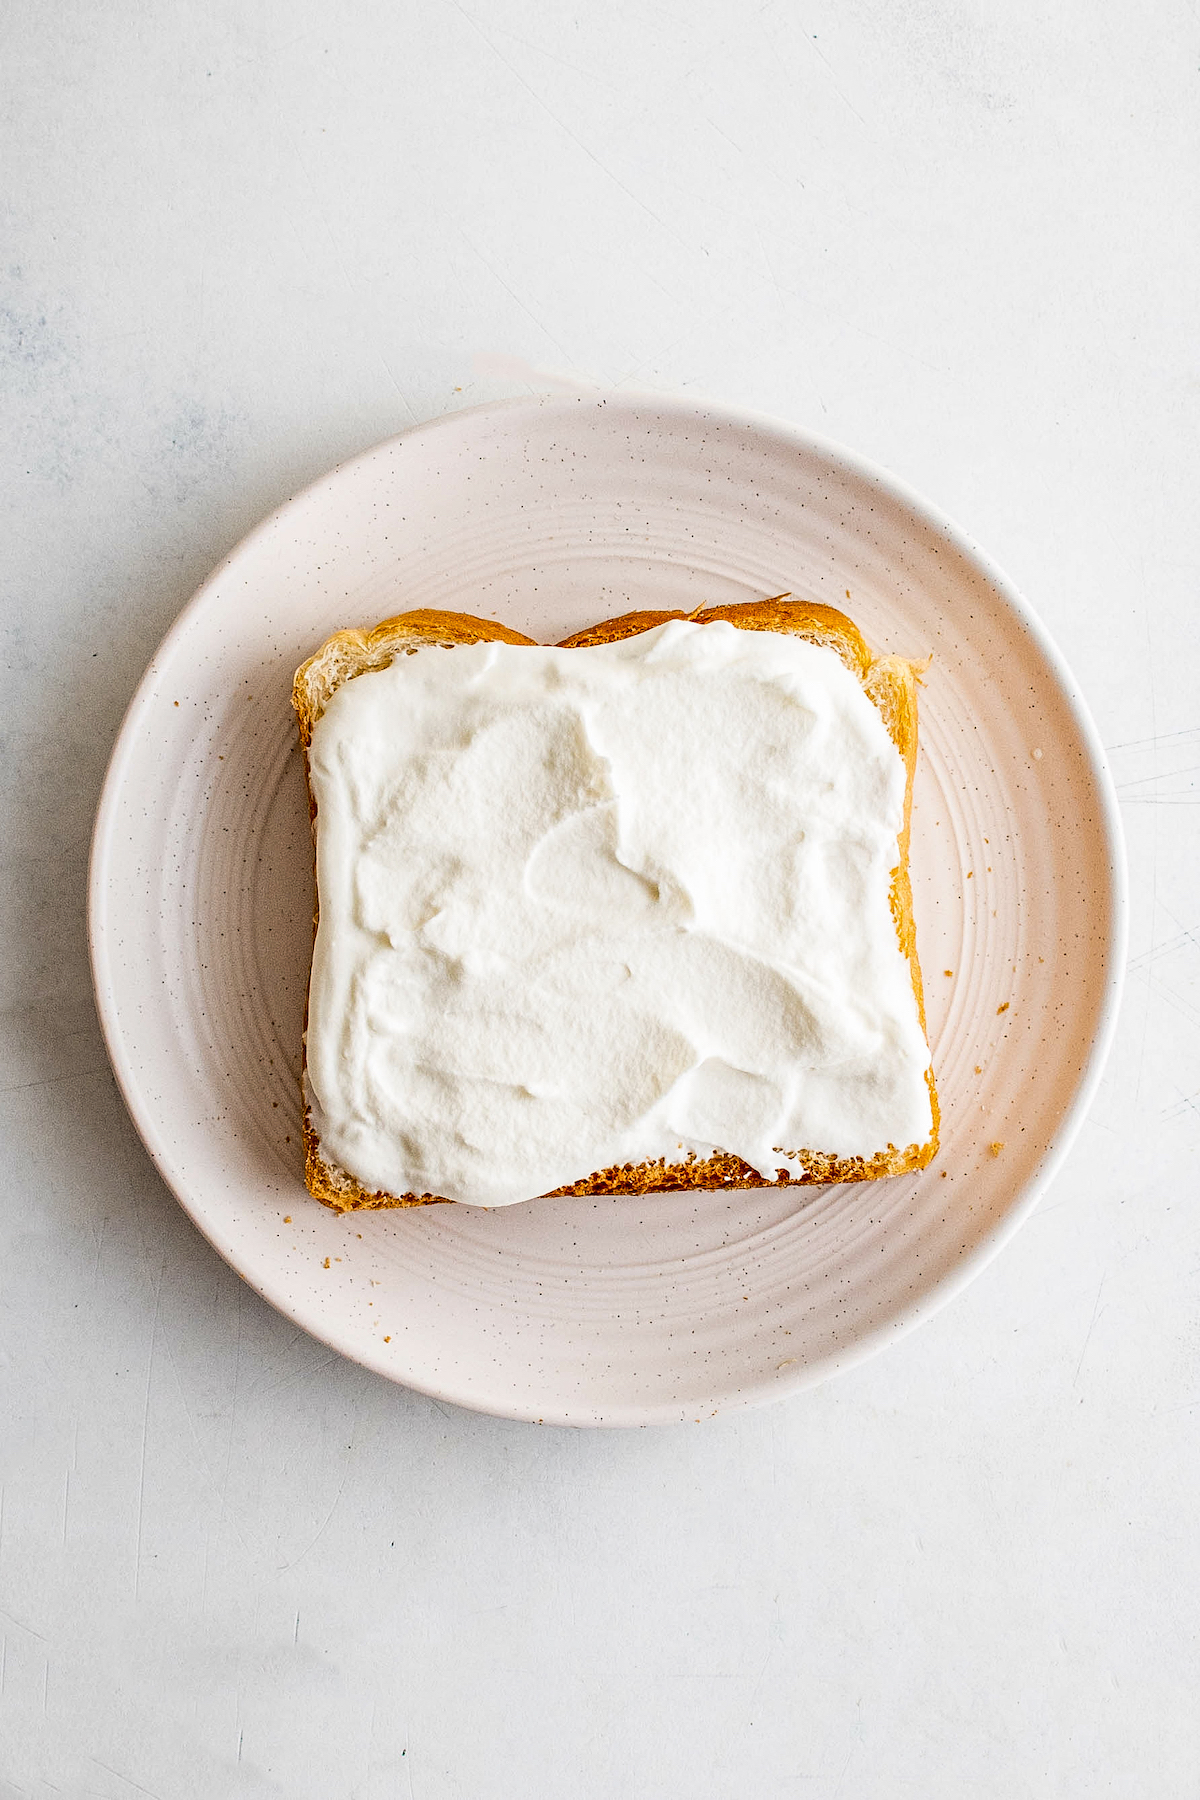 Whipped cream spread on a piece of sandwich bread.